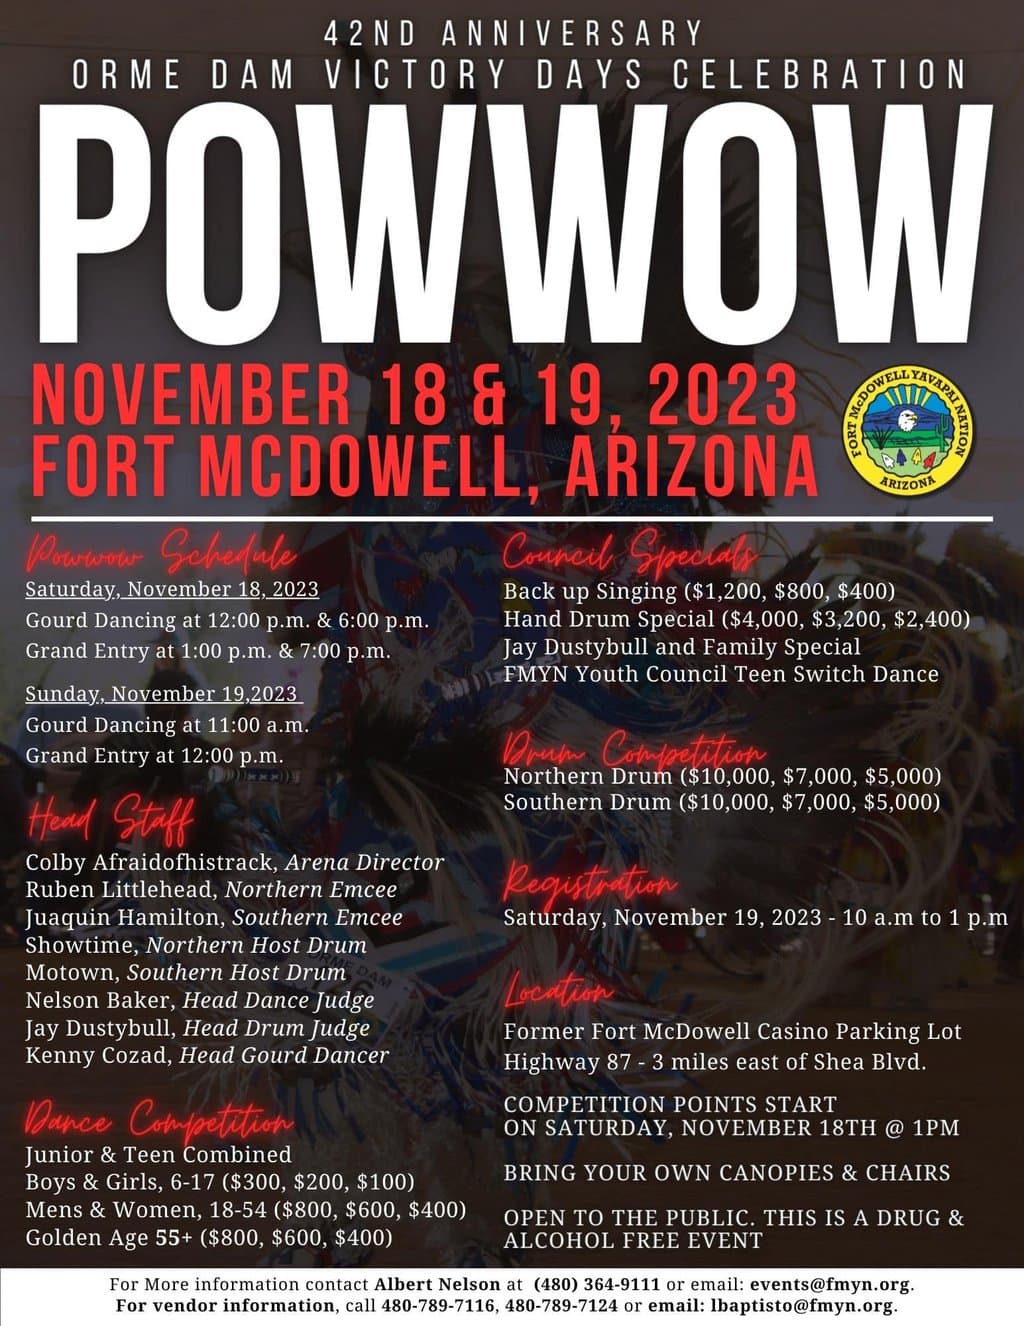 42nd Orme Dam Victory Days Pow Wow 2023